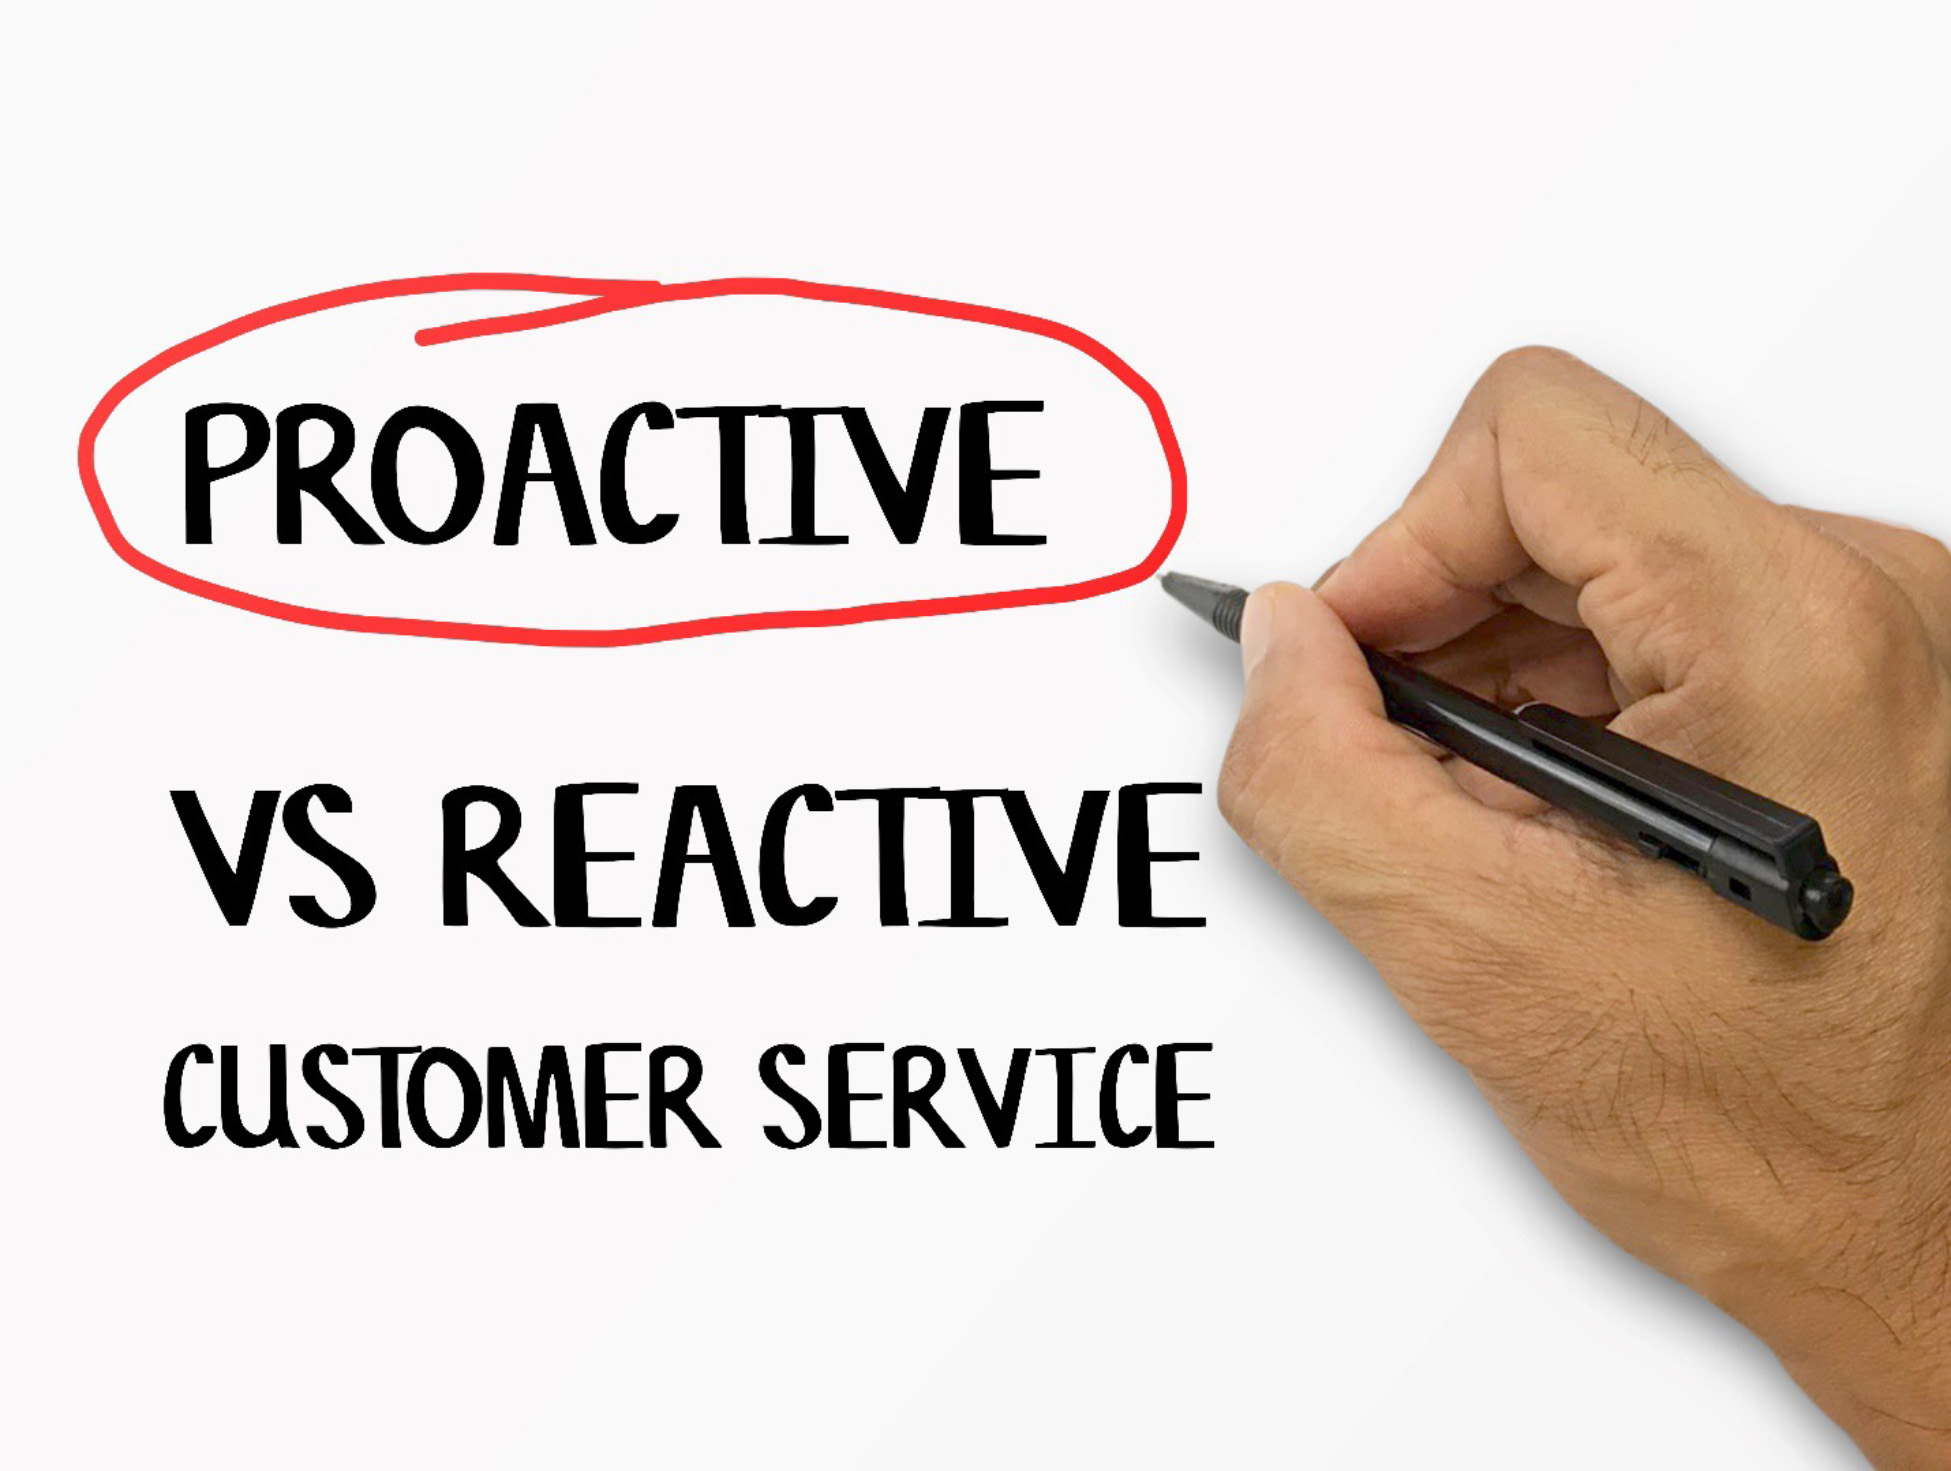 Proactive Service Will Take Your CX To The Next Level